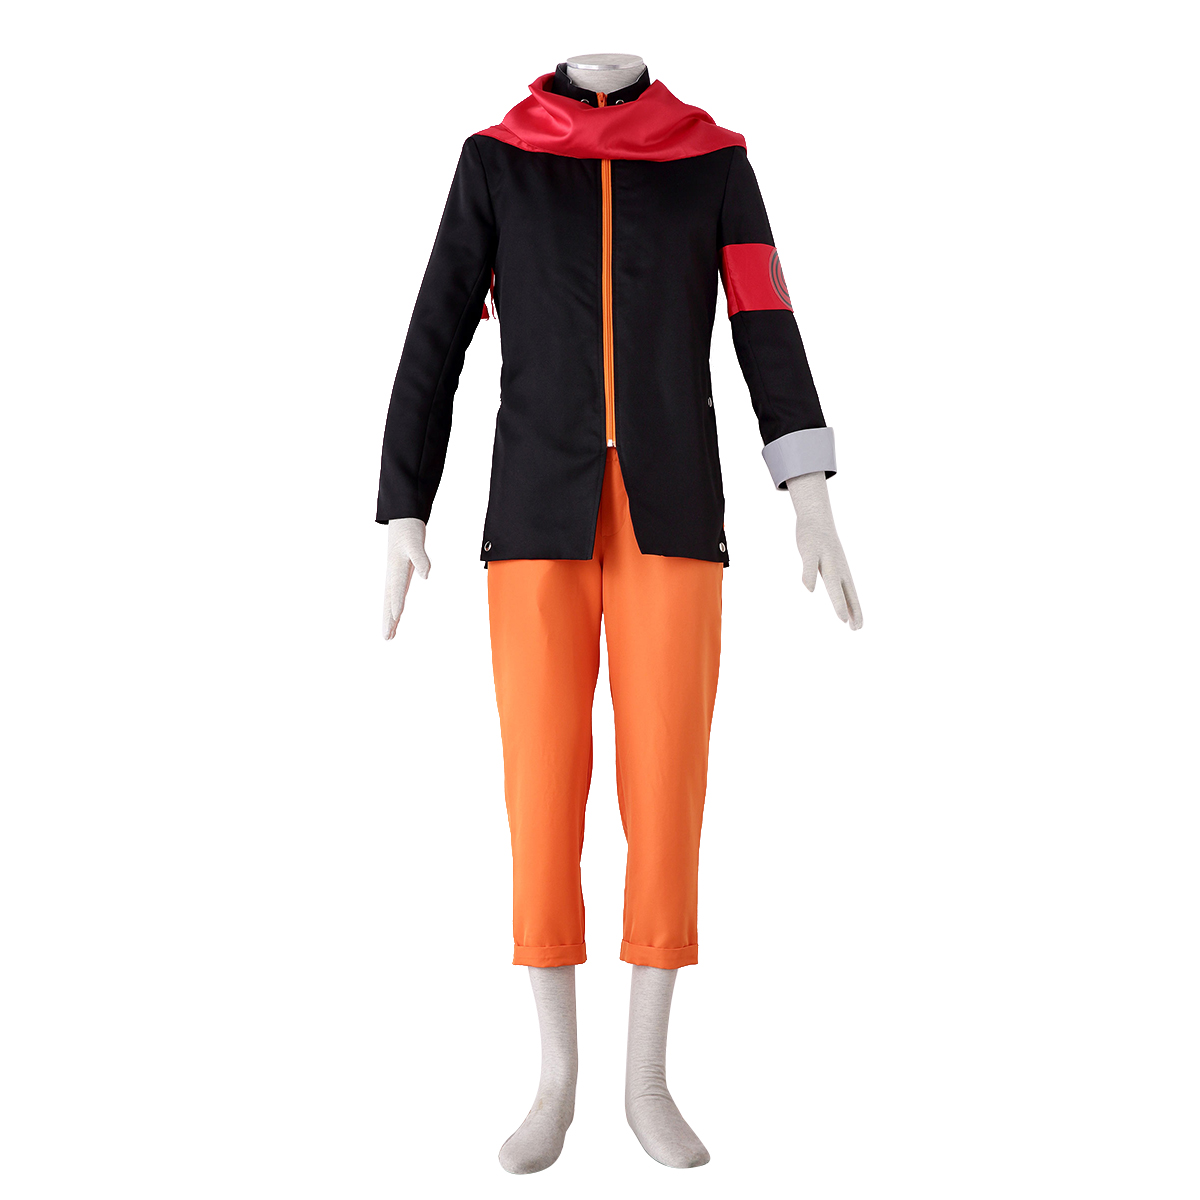 Naruto The Last Naruto 8 Anime Cosplay Costumes Outfit